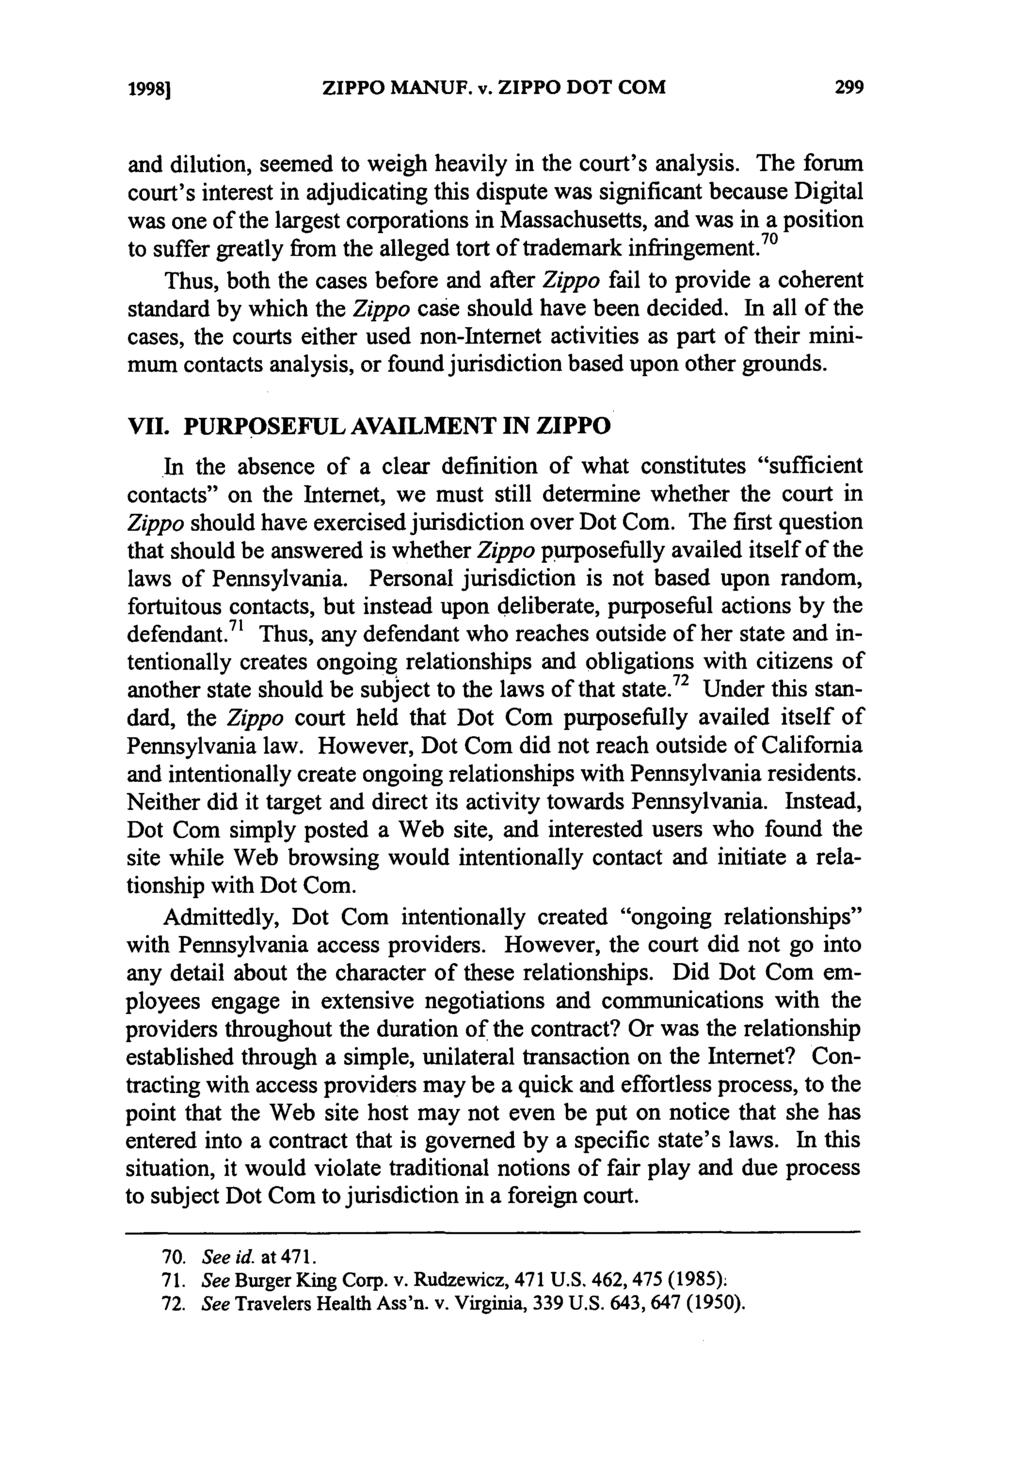 19981 ZIPPO MANUF. v. ZIPPO DOT COM and dilution, seemed to weigh heavily in the court's analysis.